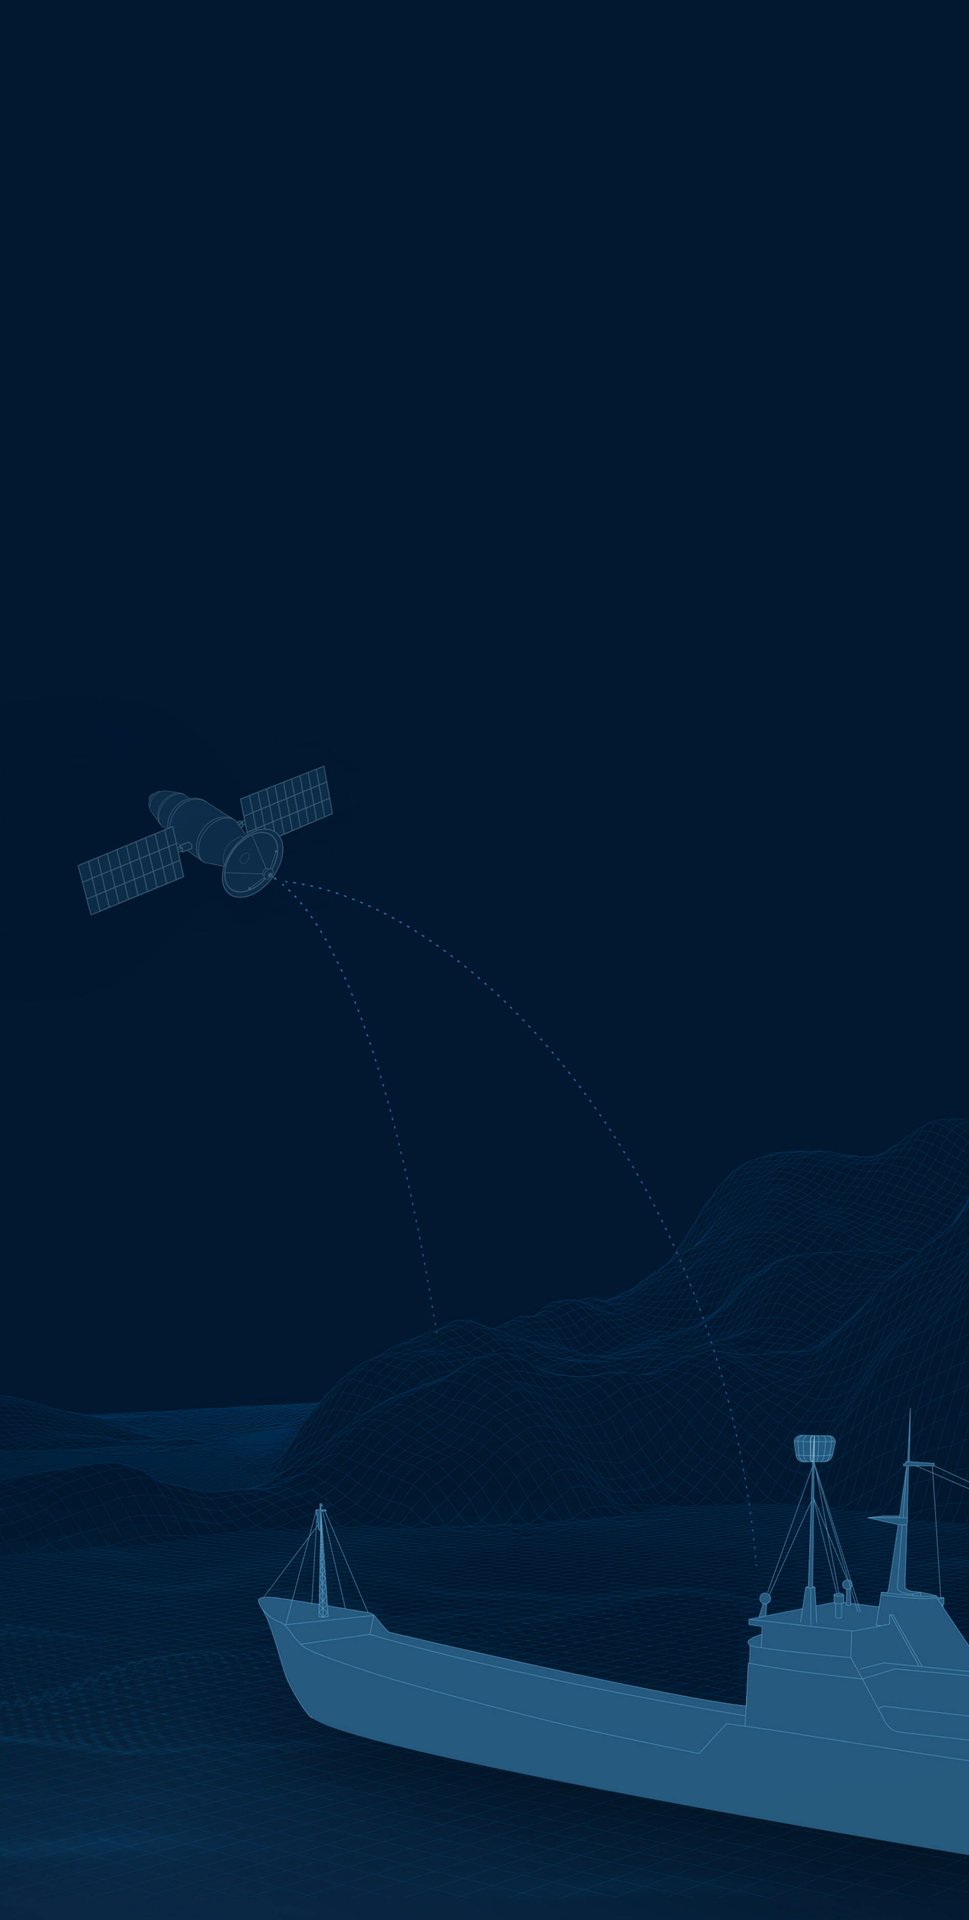 Dark blue digital illustration of a ship and satellite at sea, conveying high-tech navigation and connectivity in maritime operations